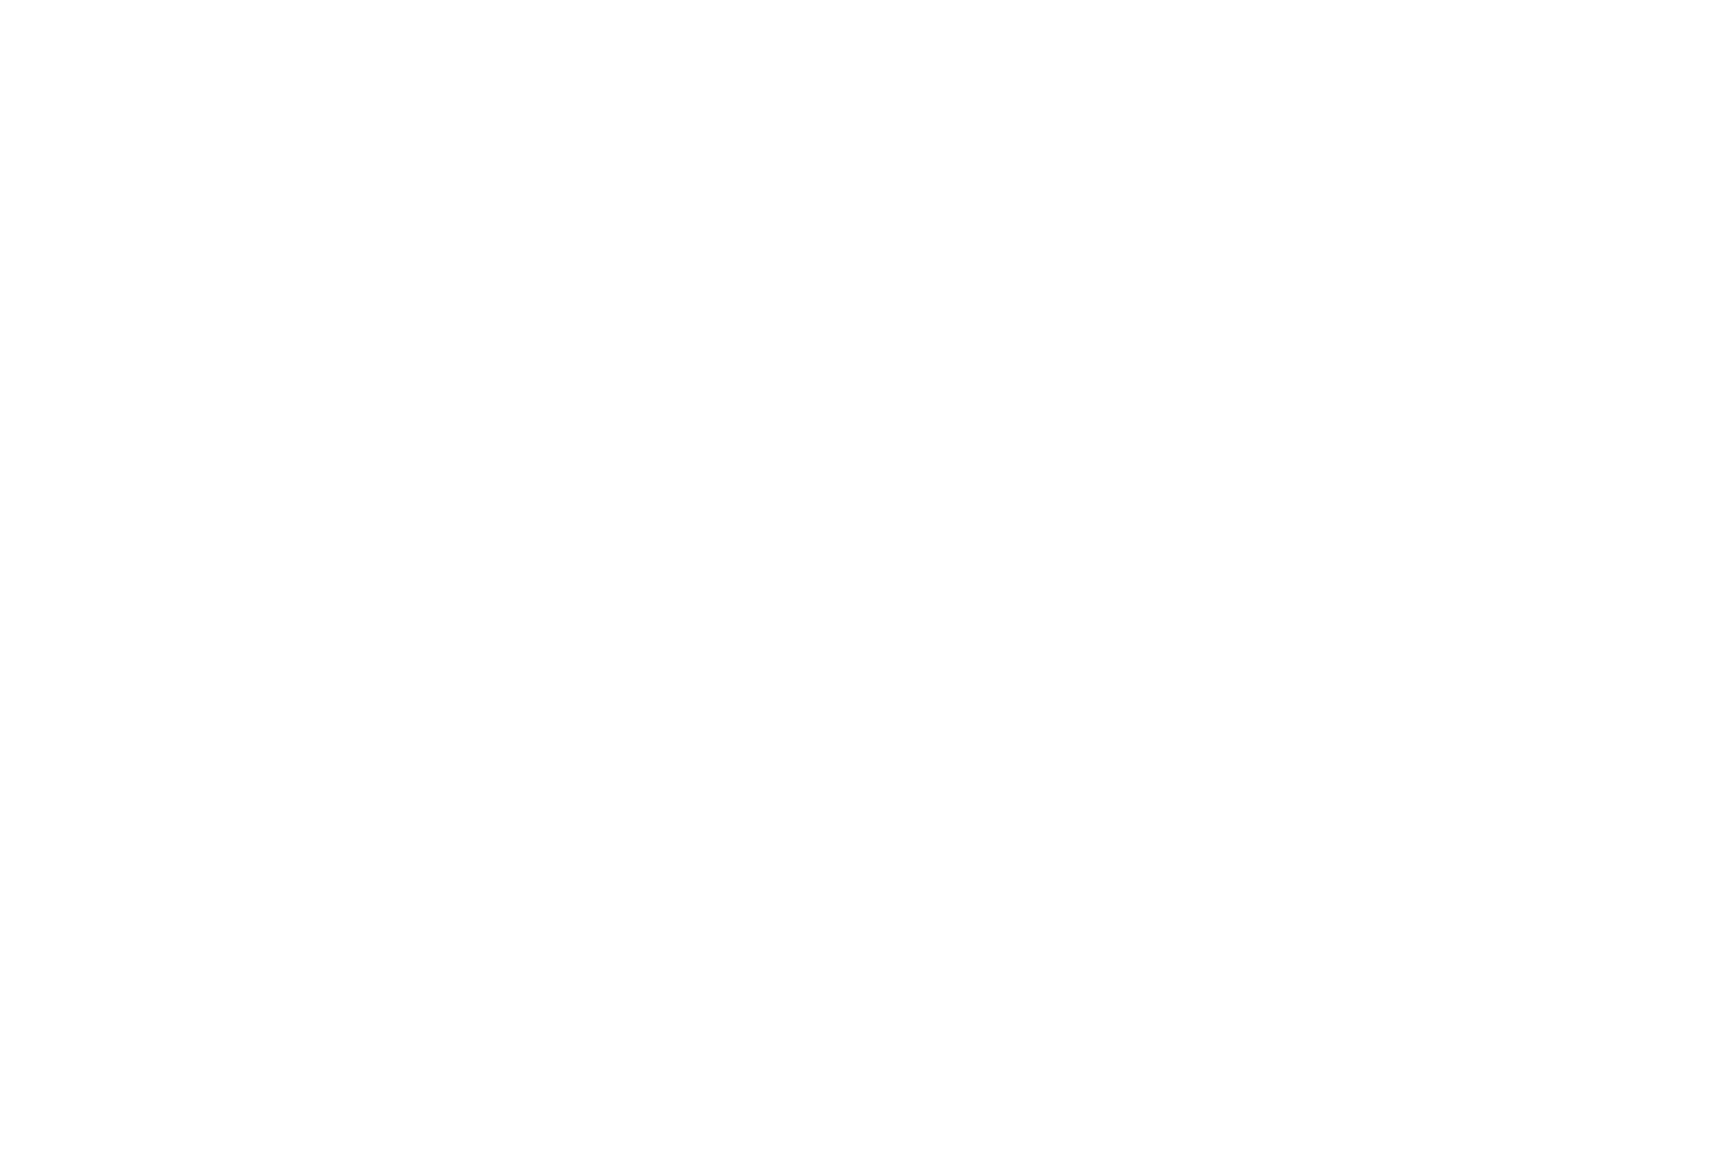 NOMINATED - BEST SOUND EDITING - Indie Short Fest - 2020.png